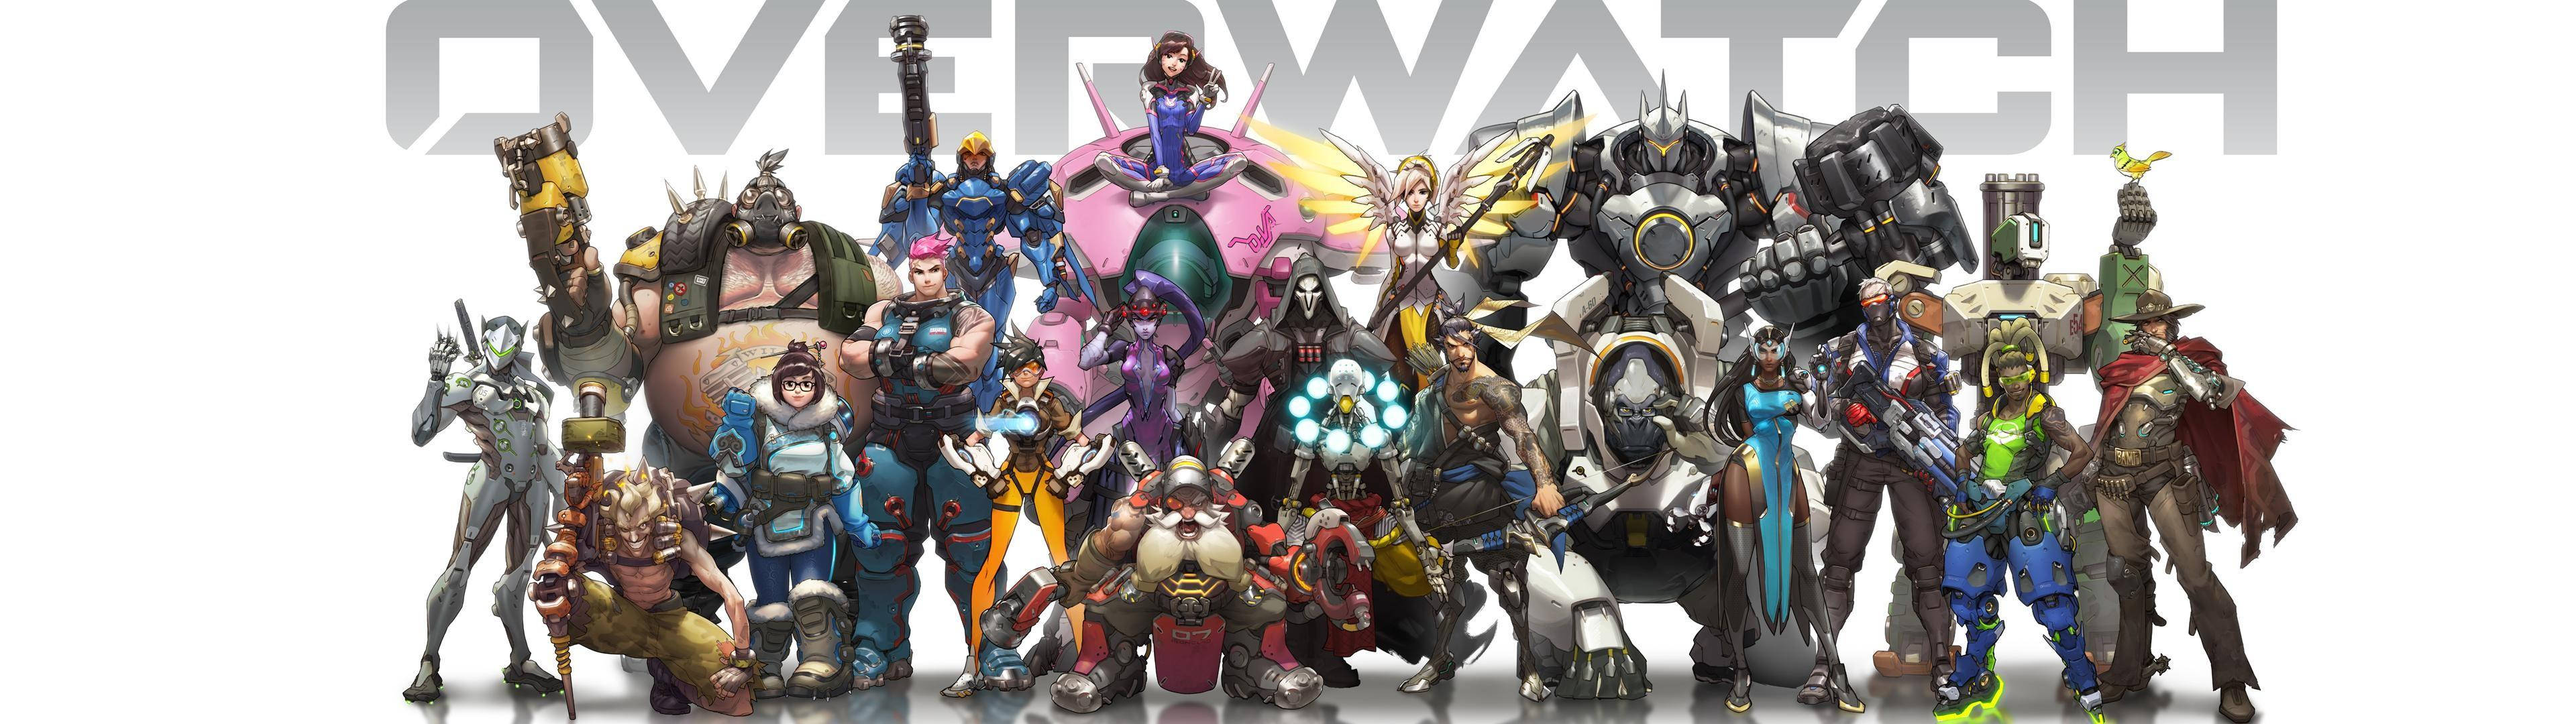 Exciting Reveal of Overwatch 2 Character Line-up Wallpaper